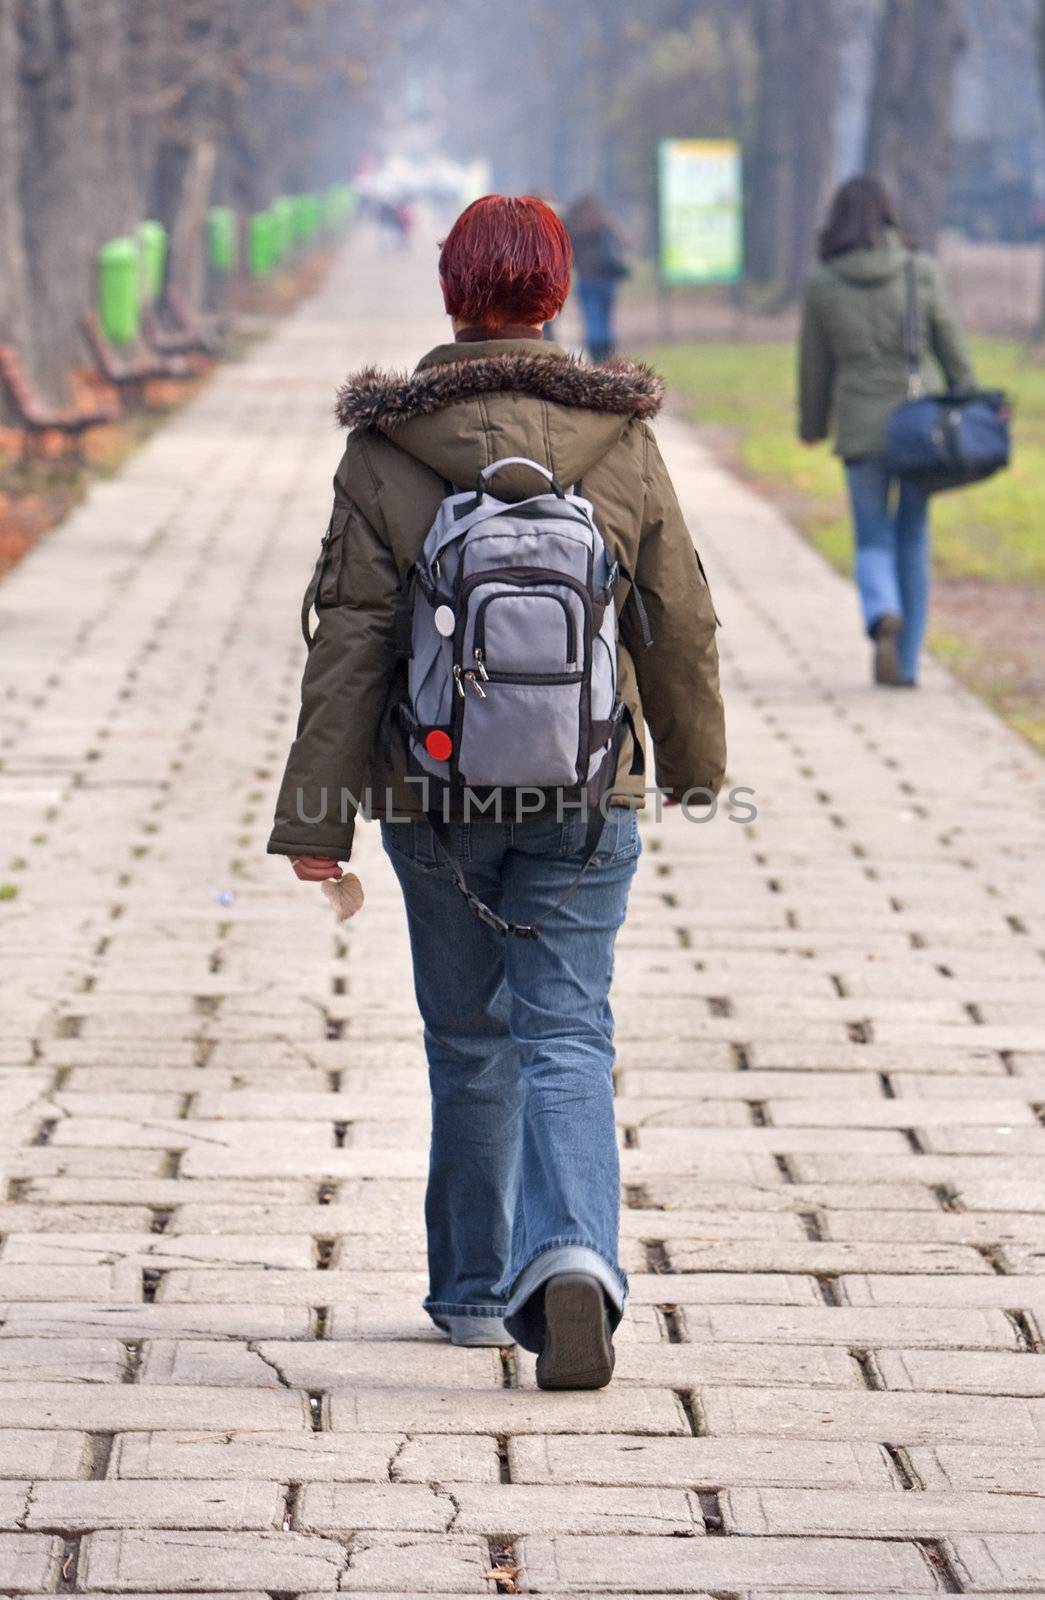 Redhead teen with backpack walking in an autumn park.Shot with Canon 70-200mm f/2.8L IS USM